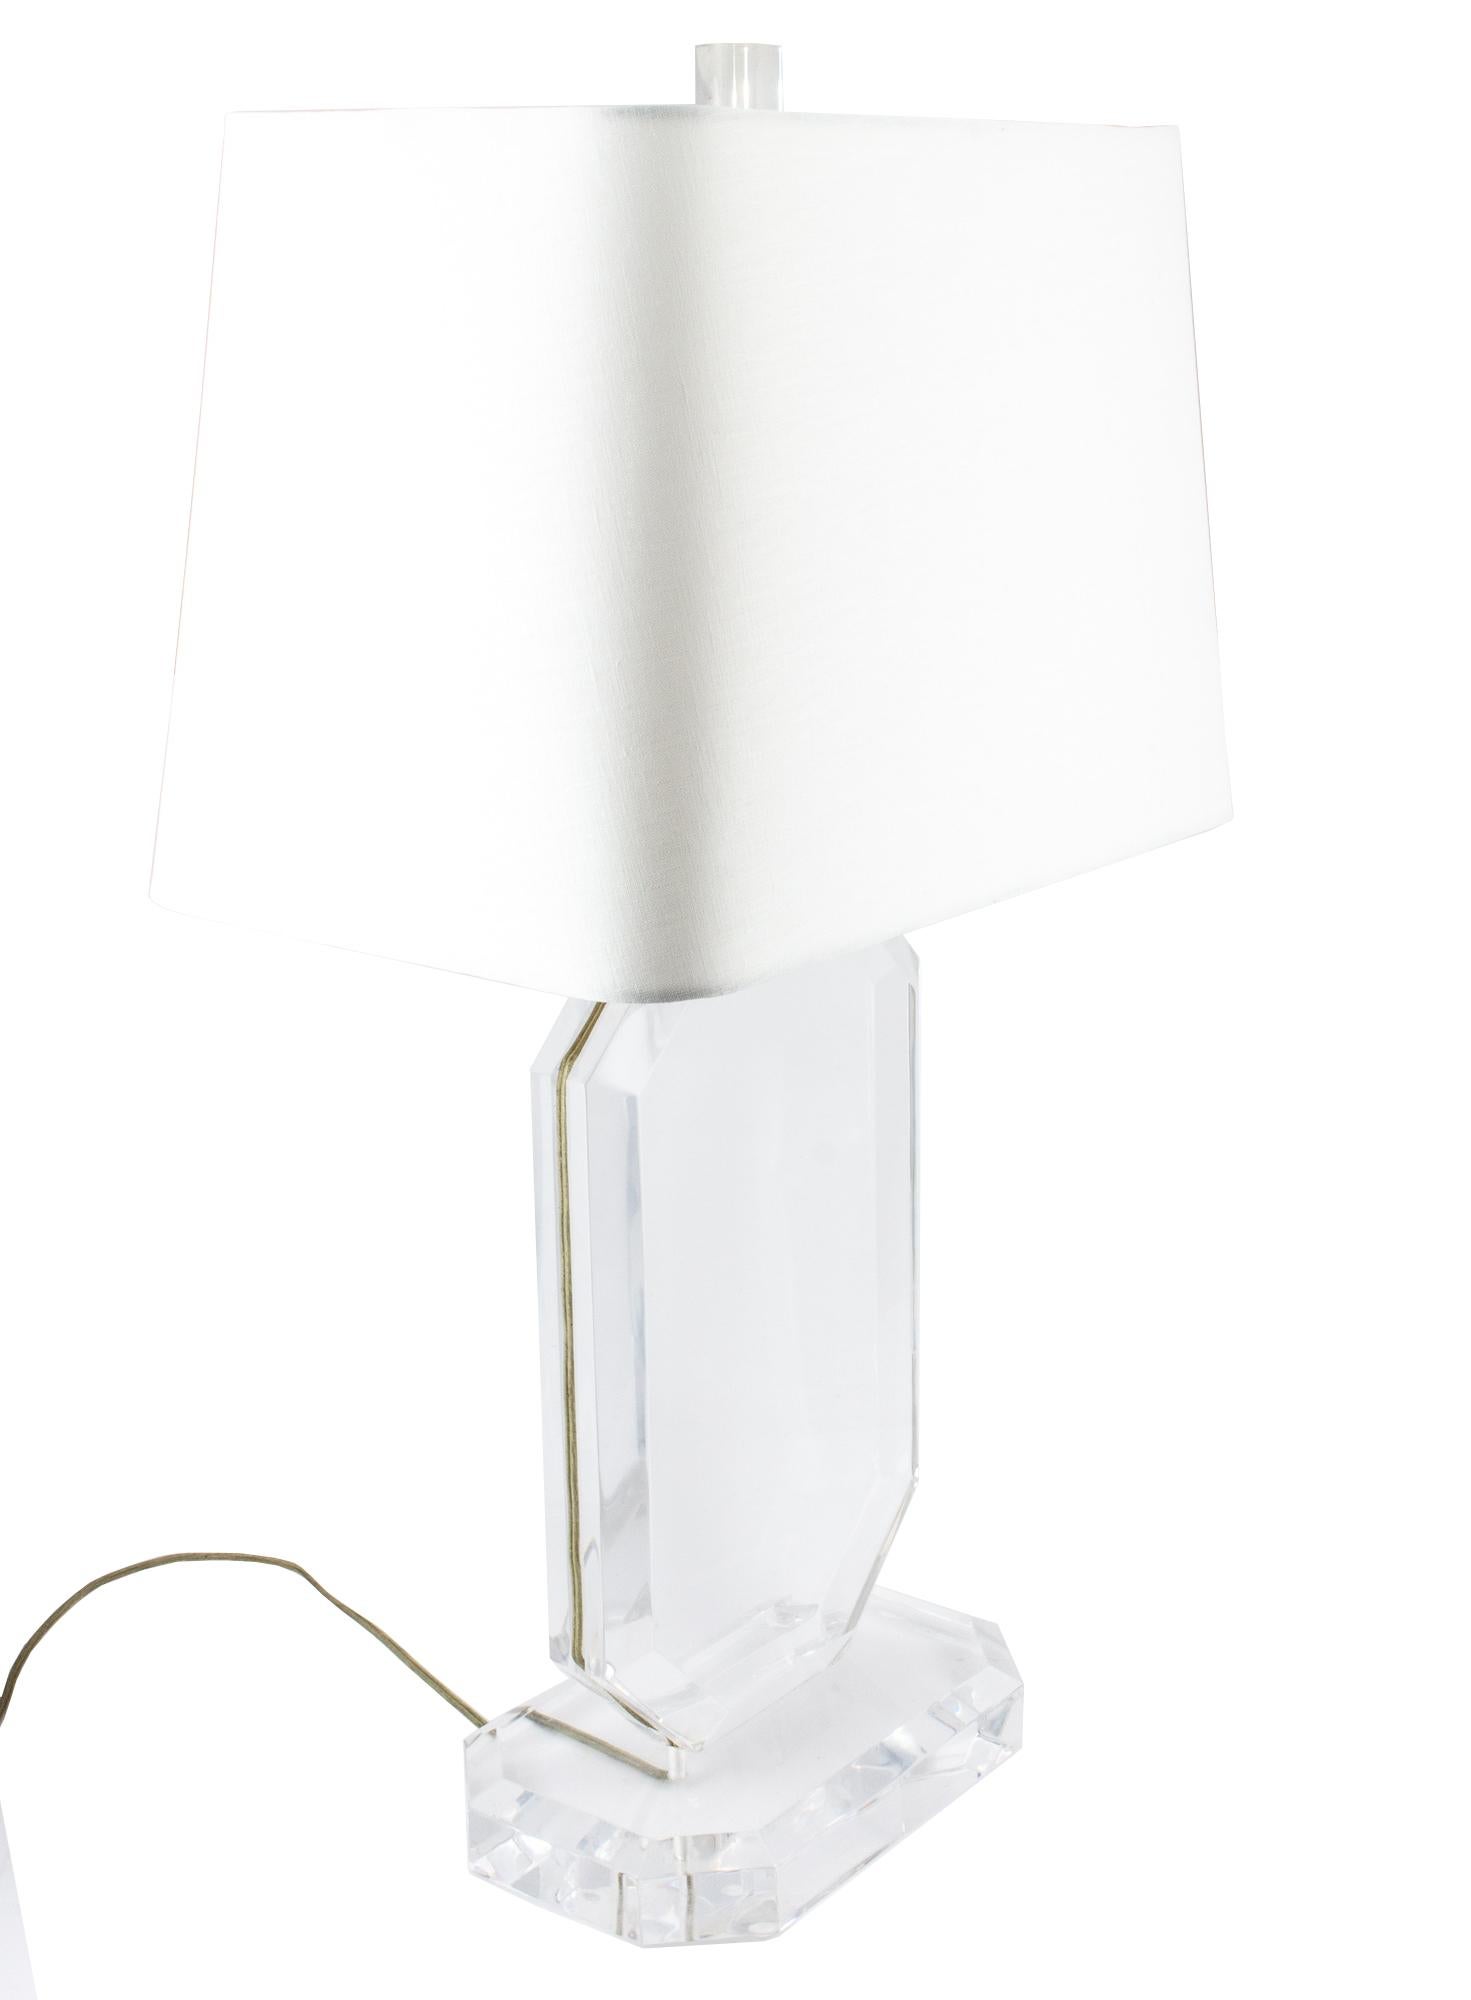 A truly lovely pairing of midcentury Lucite acrylic lamps, a pairing of two are being offered and have beveled edging creating a jewel like look. Stylish in almost any interior space, the rounded linen shade is a new addition in a soft white color,